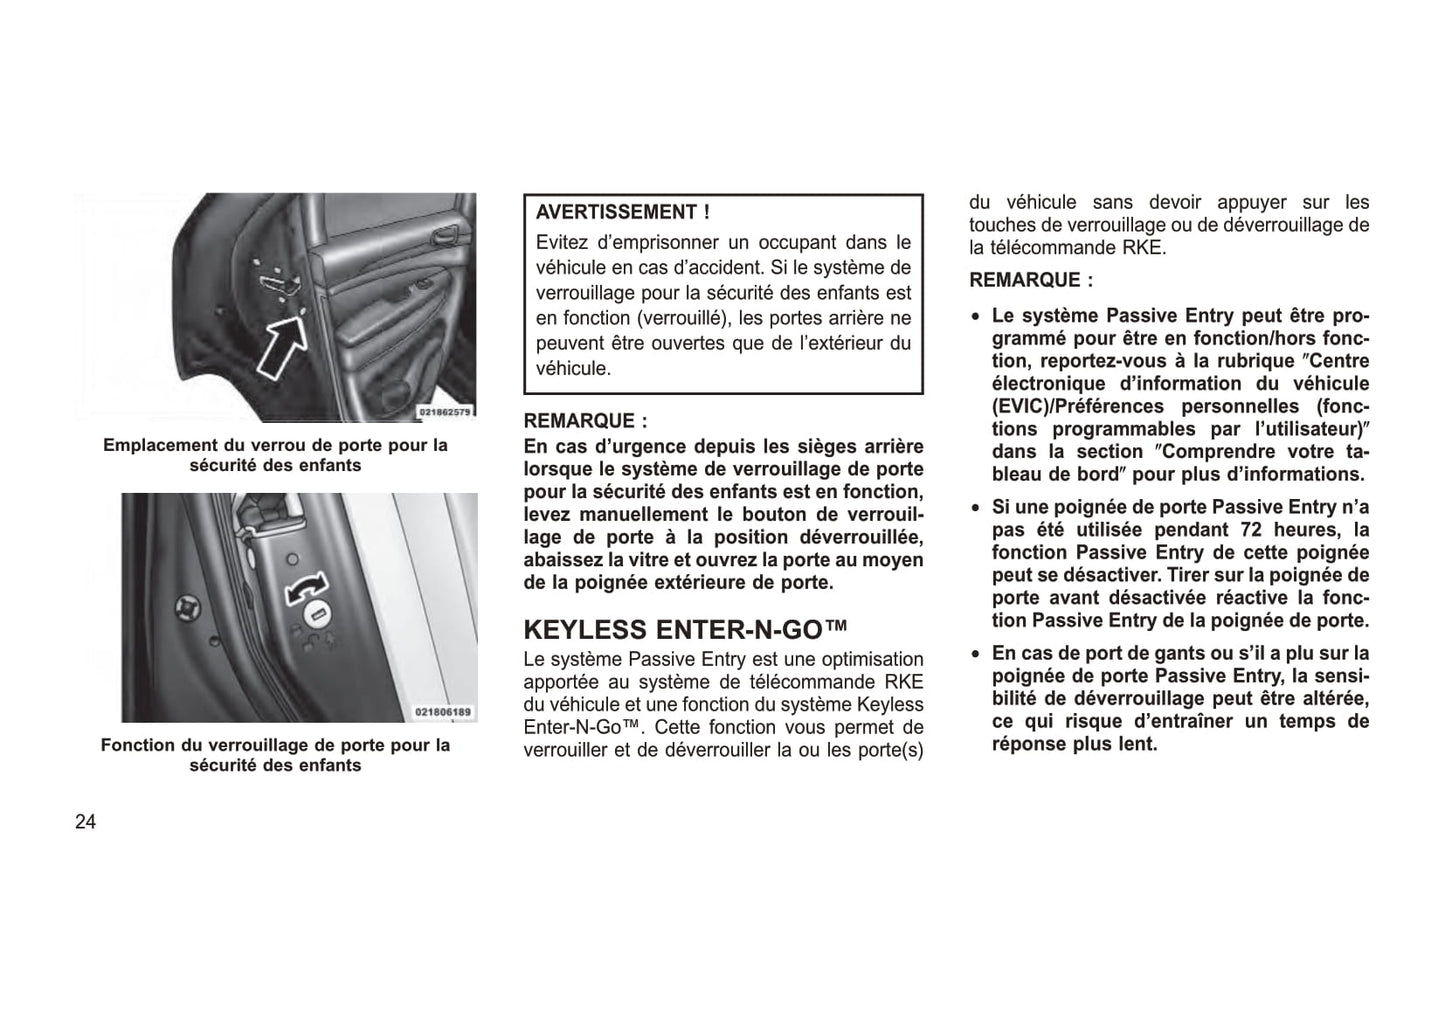 2012-2013 Jeep Grand Cherokee Owner's Manual | French